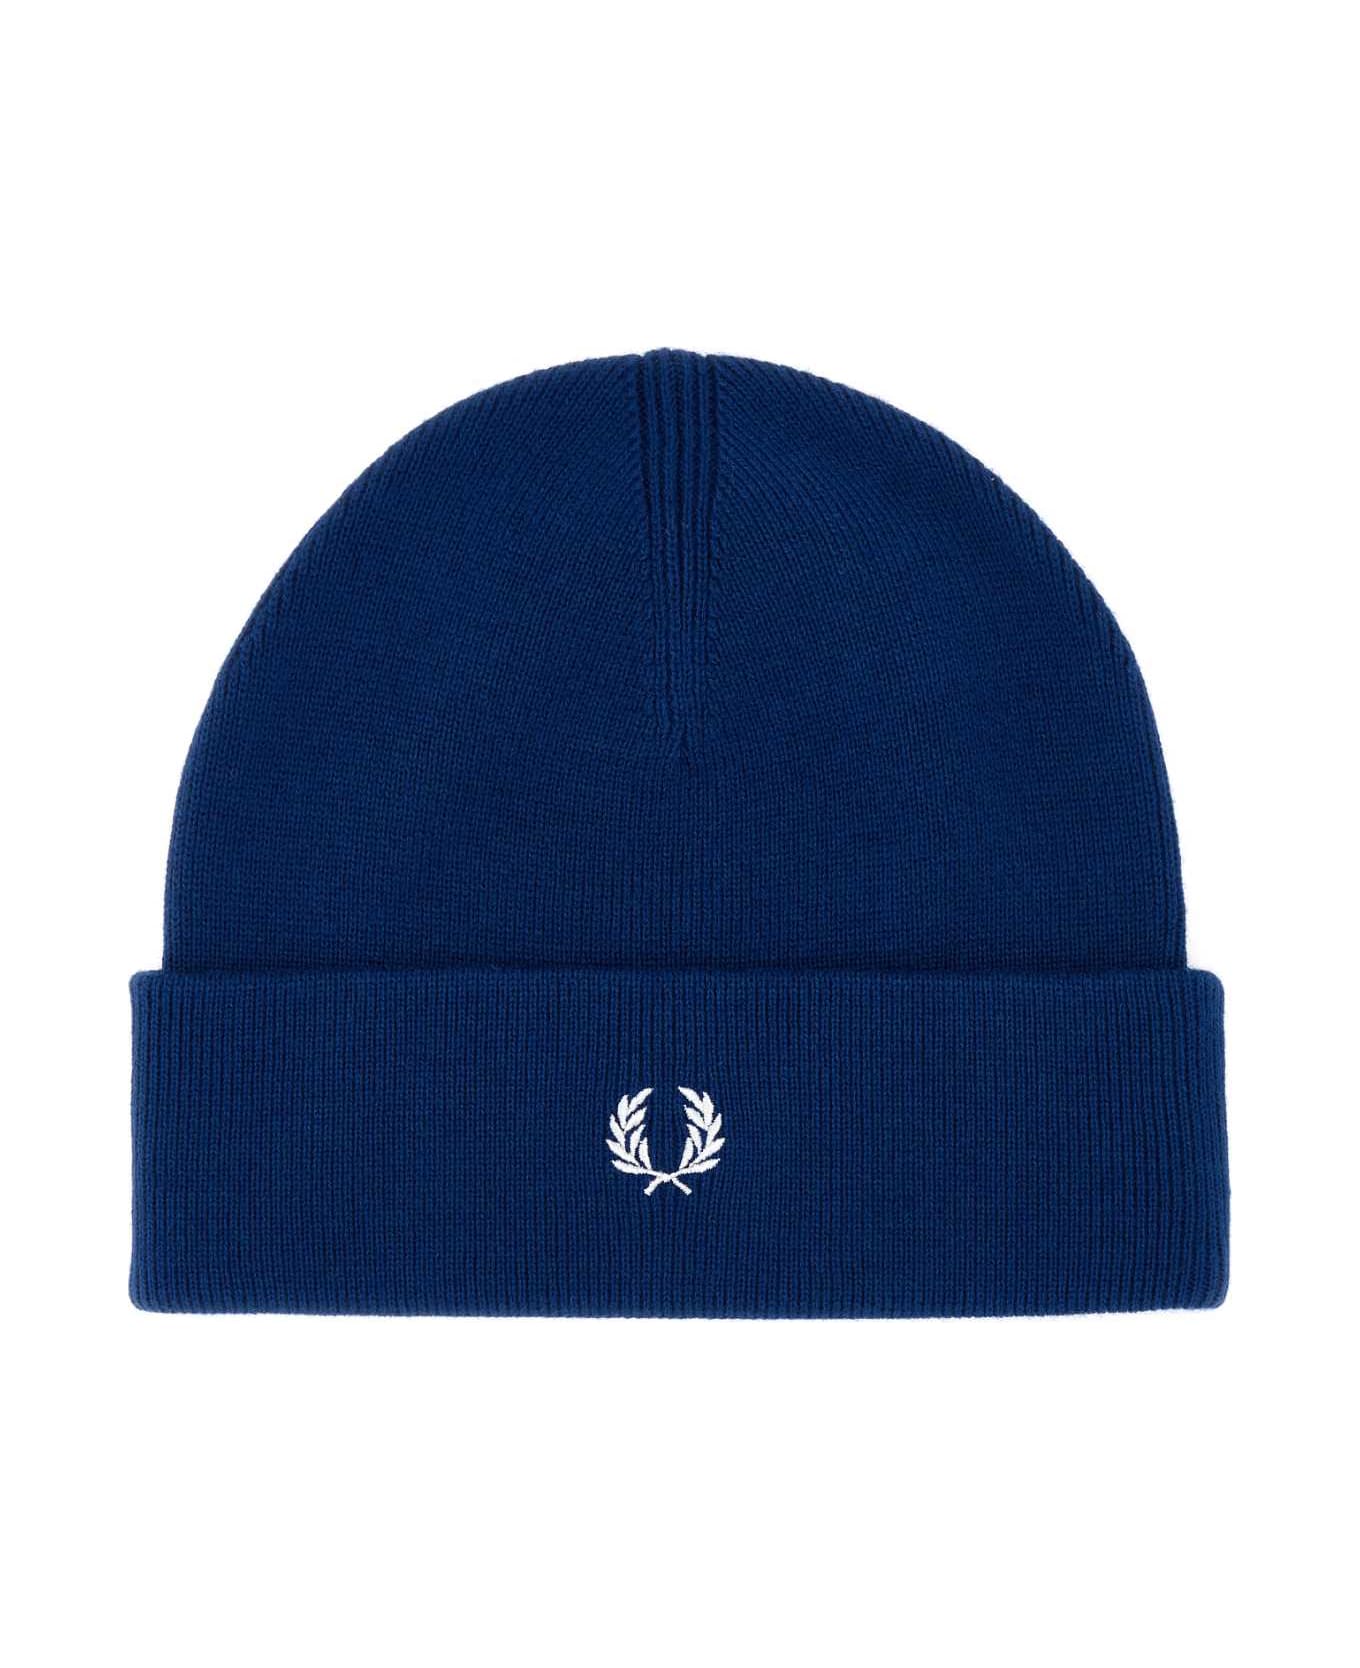 Fred Perry Electric Blue Wool Blend Beanie Hat - NAVY